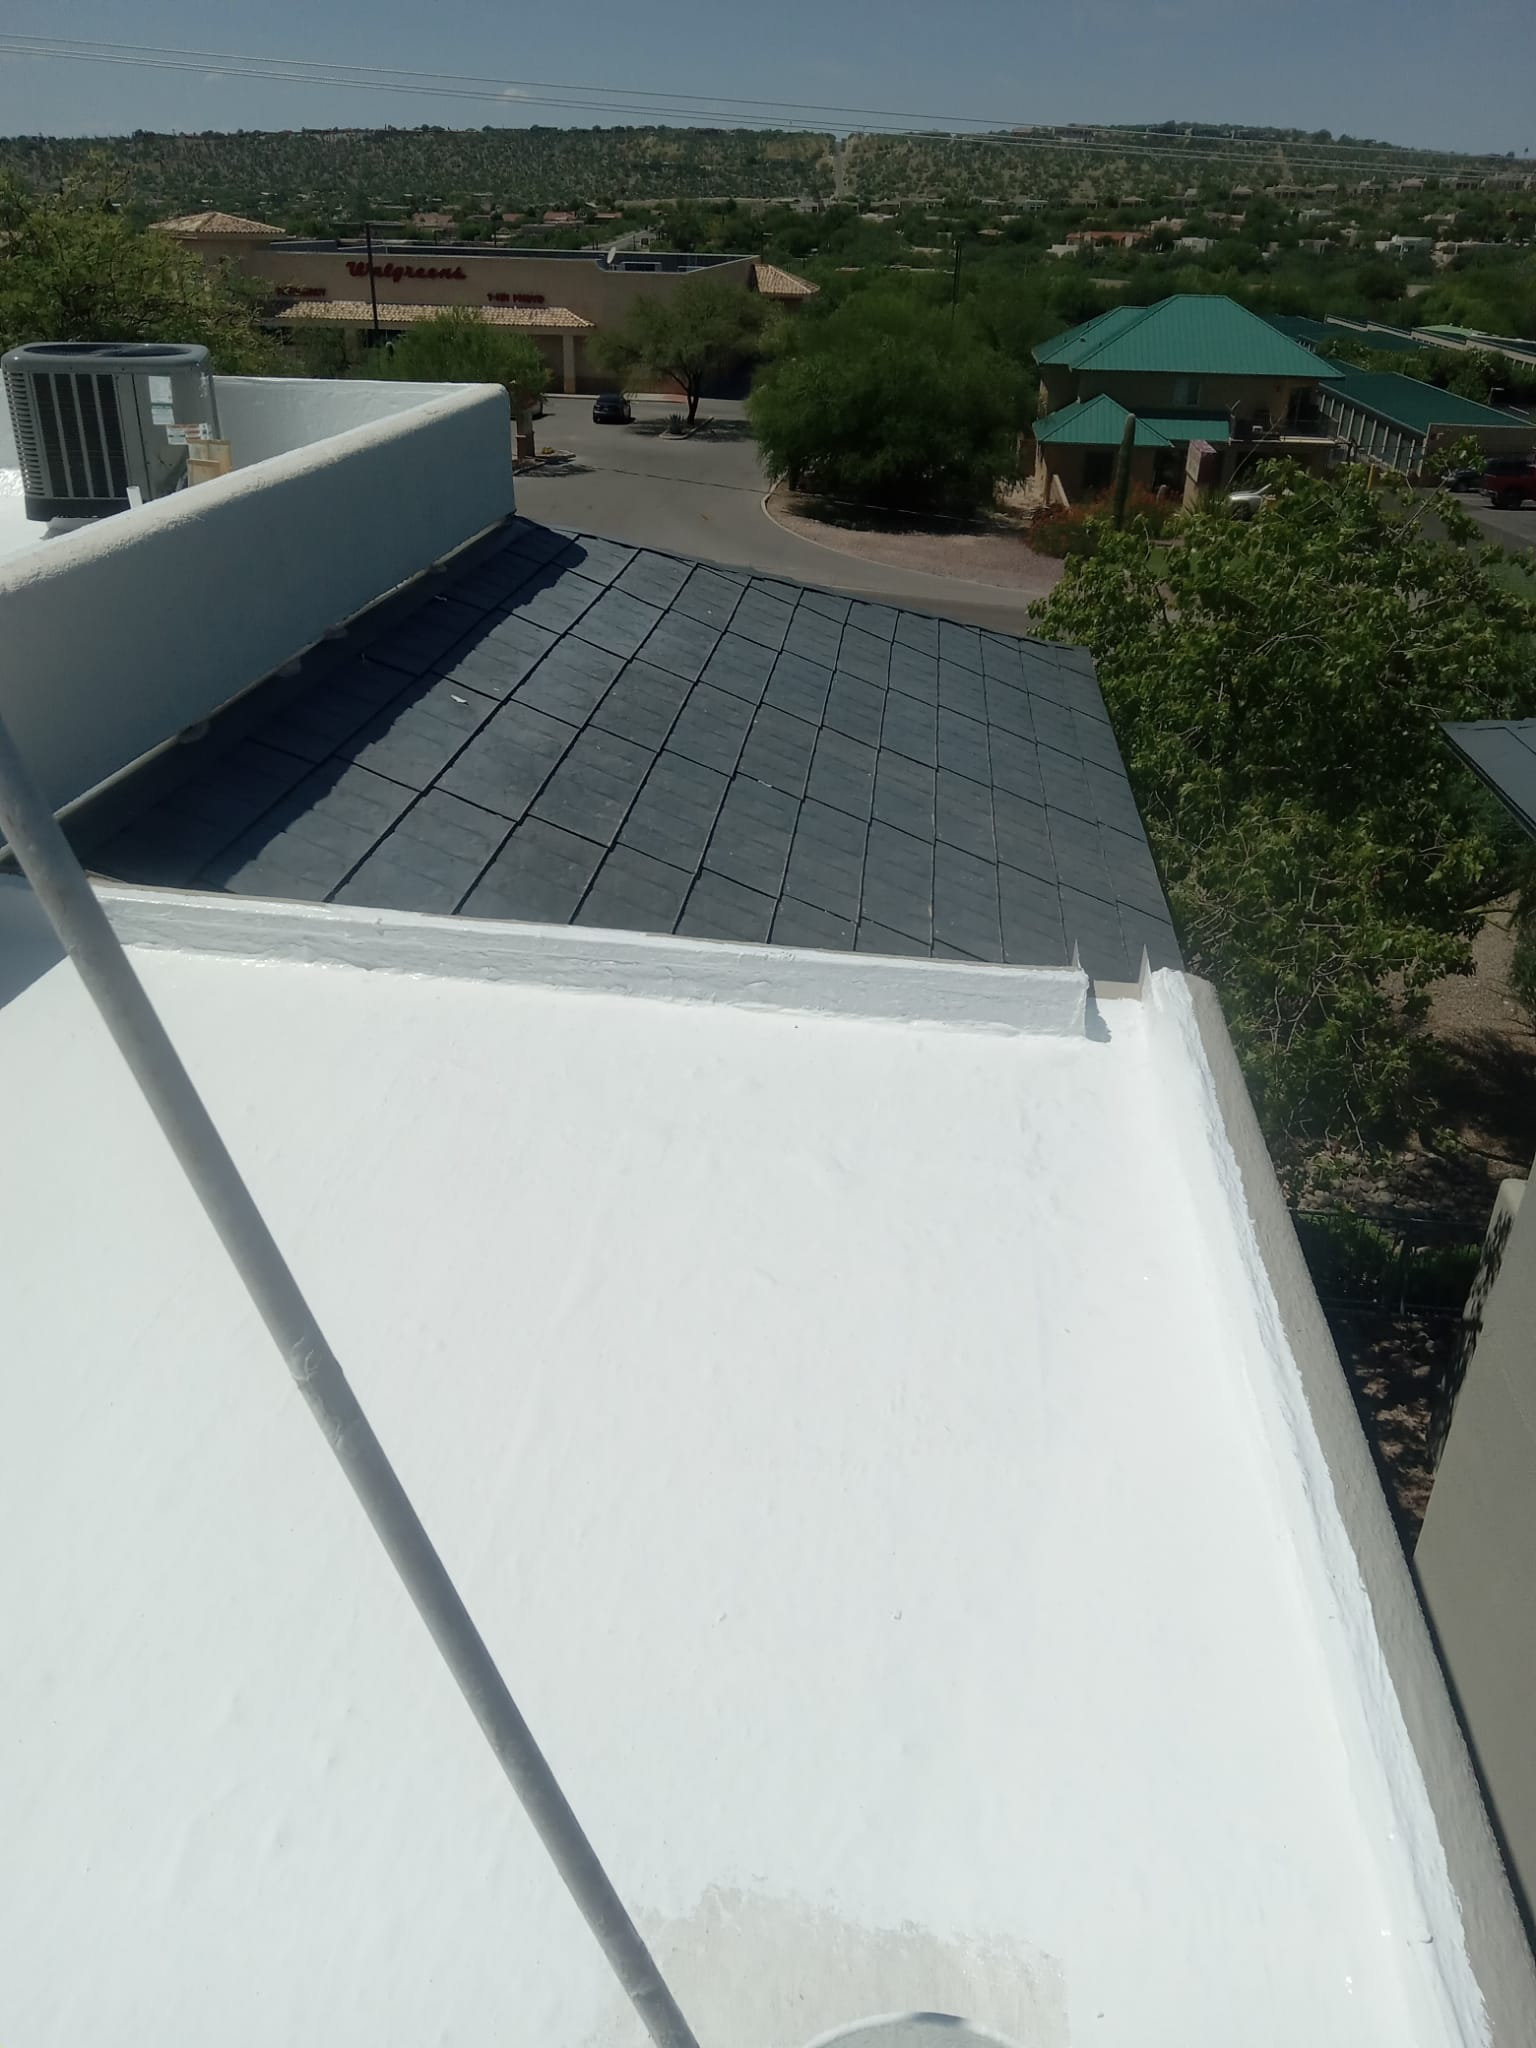 Freshly applied spray foam on a Biltmore area home's roof, glistening under the bright desert sun.